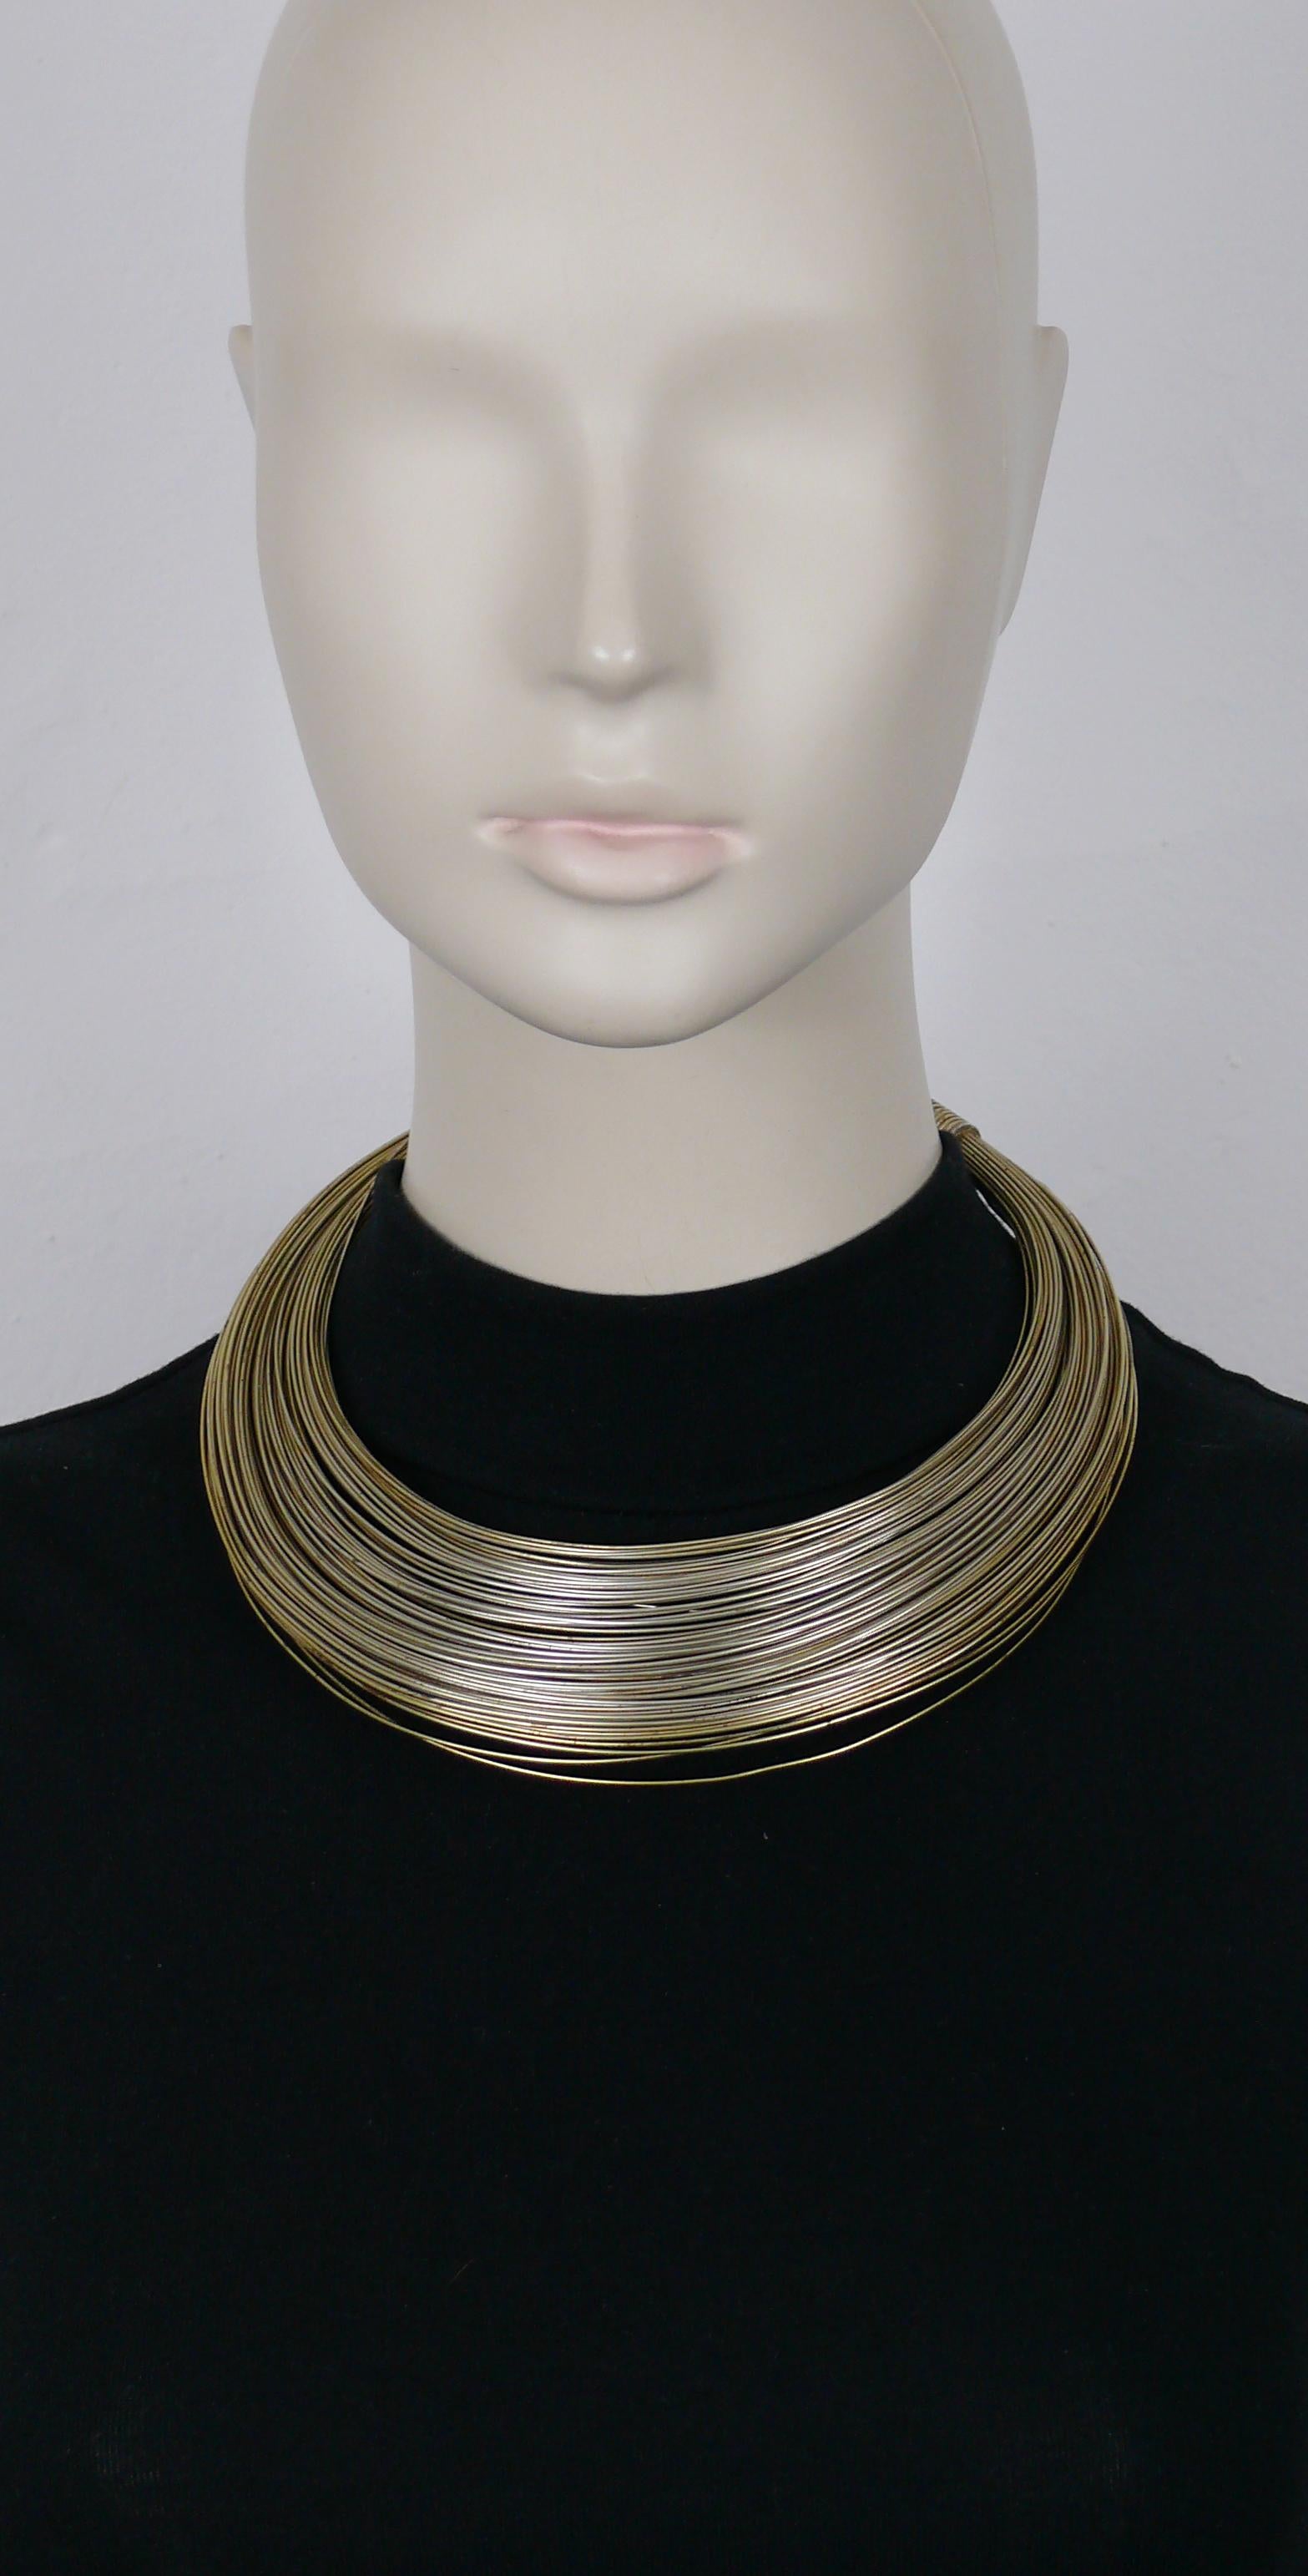 JEAN PAUL GAULTIER vintage Masai light gold tone multi wire choker necklace.

Adjustable hook clasp closure.

Marked GAULTIER.

Indicative measurements : minimum inner circumference approx. 39.27 cm (15.46 inches) - expandable to larger